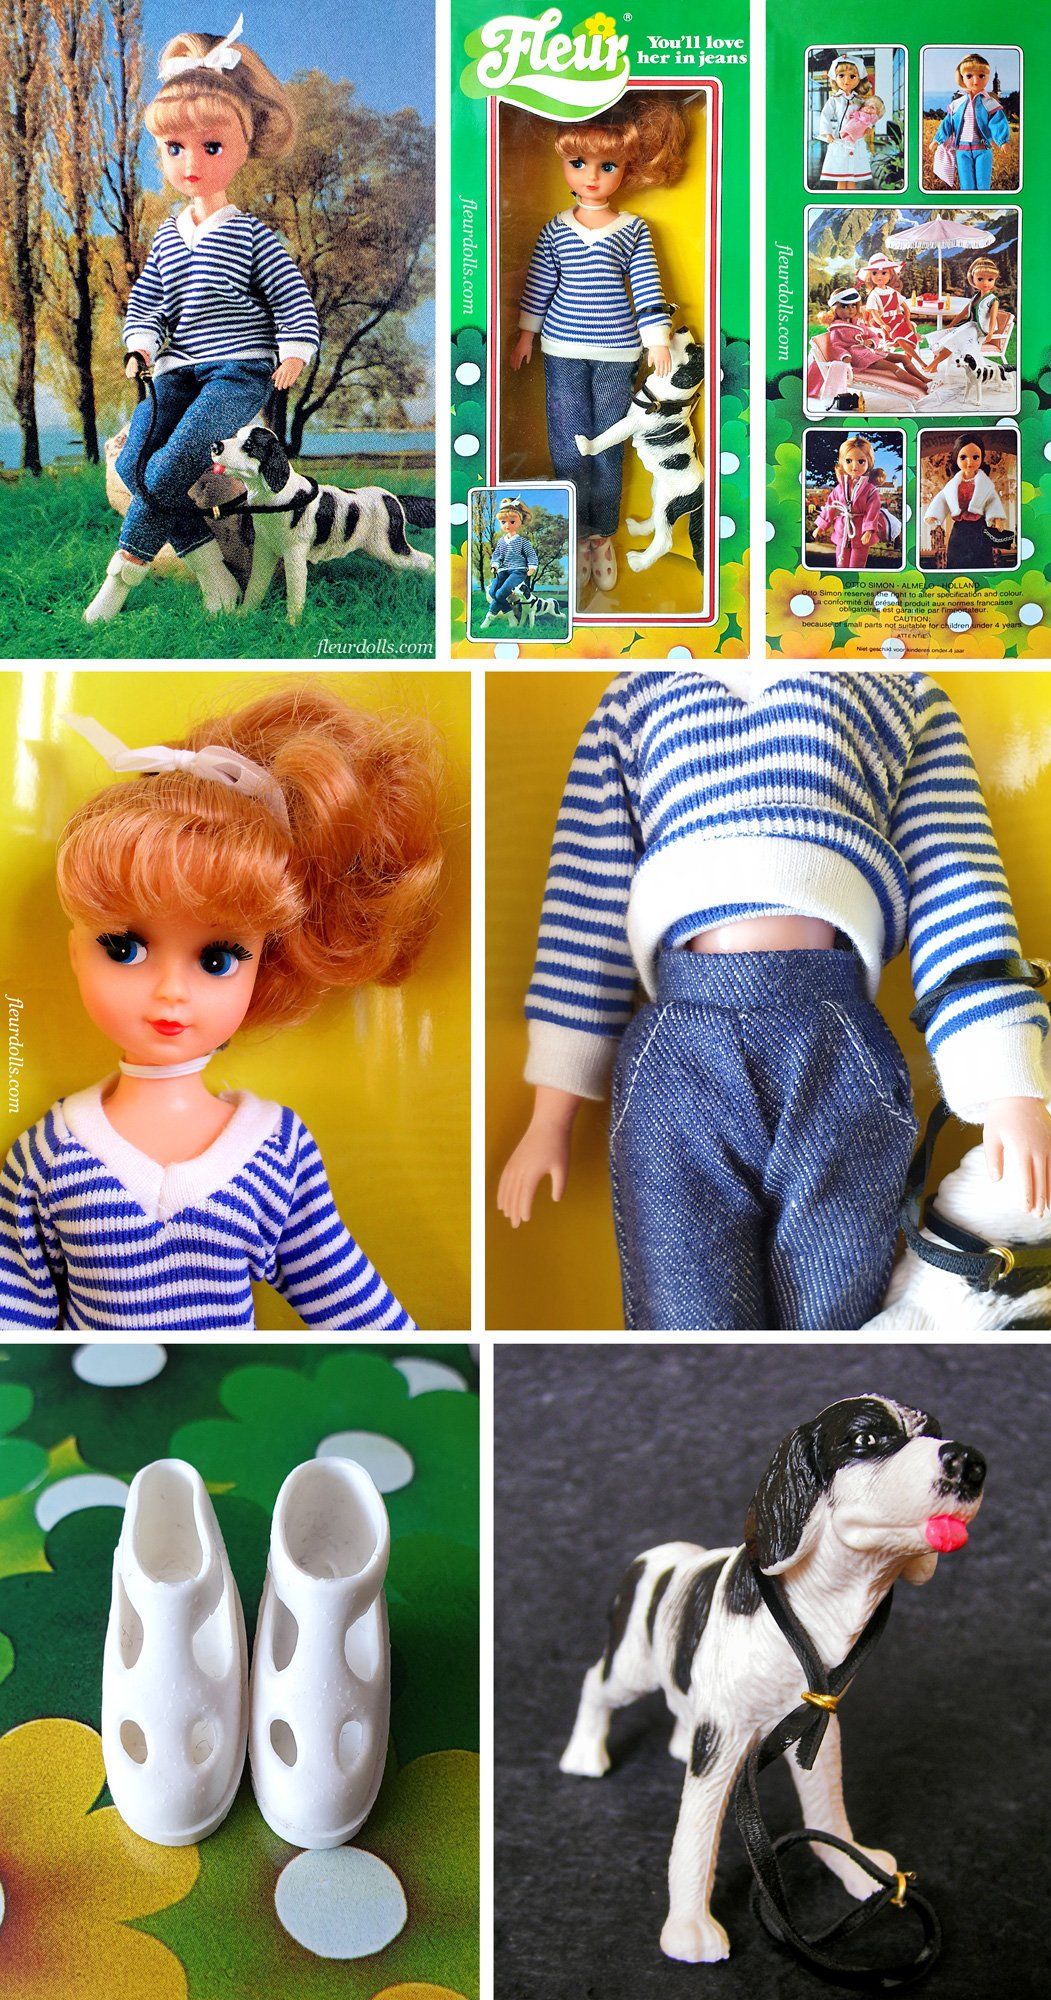 Jeans Fleur Dutch doll by Otto Simon from Netherlands with dog and blue jeans